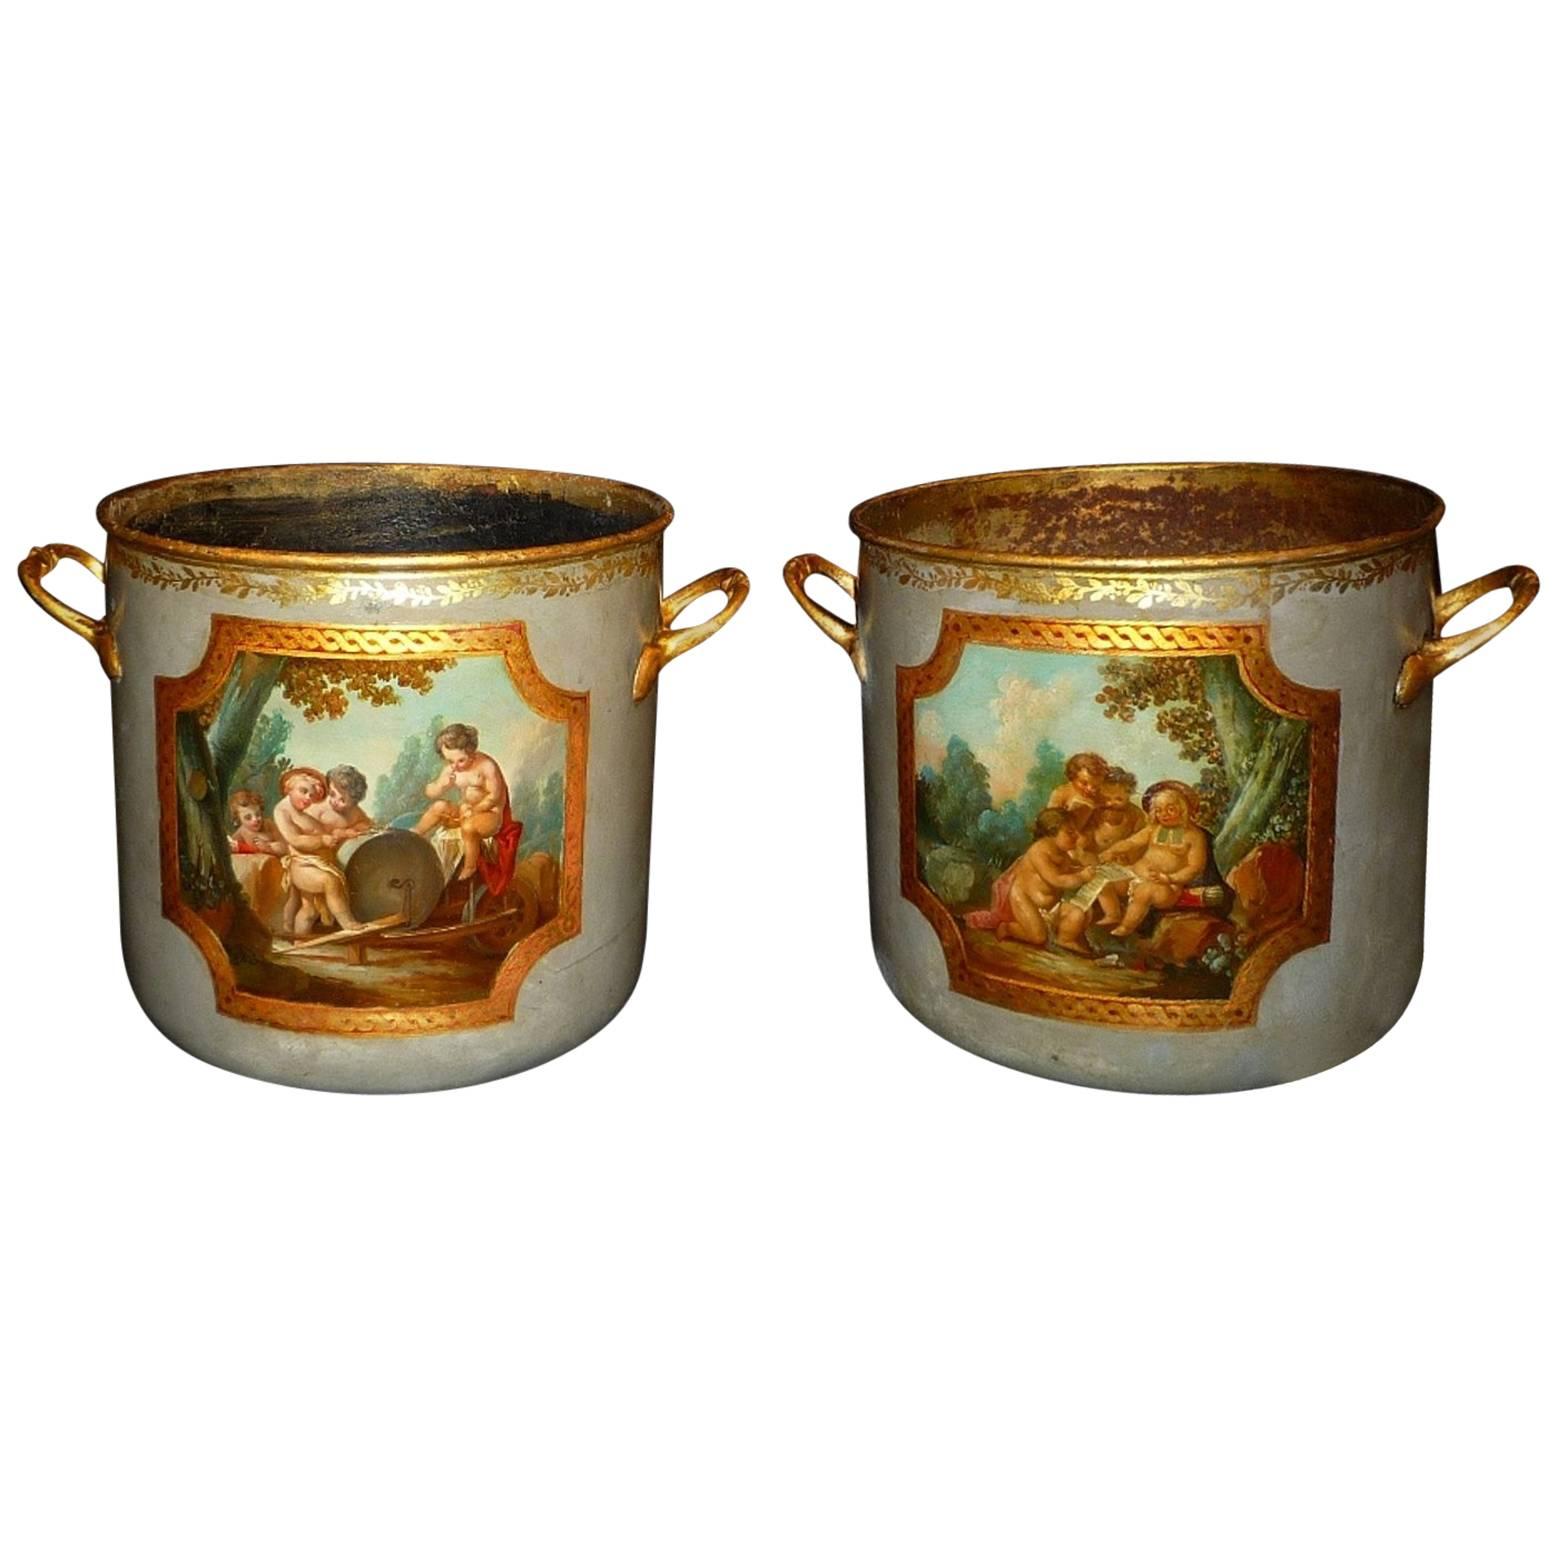 Pair of Rare French Louis XV Period Lacquered Wine Coolers, circa 1760